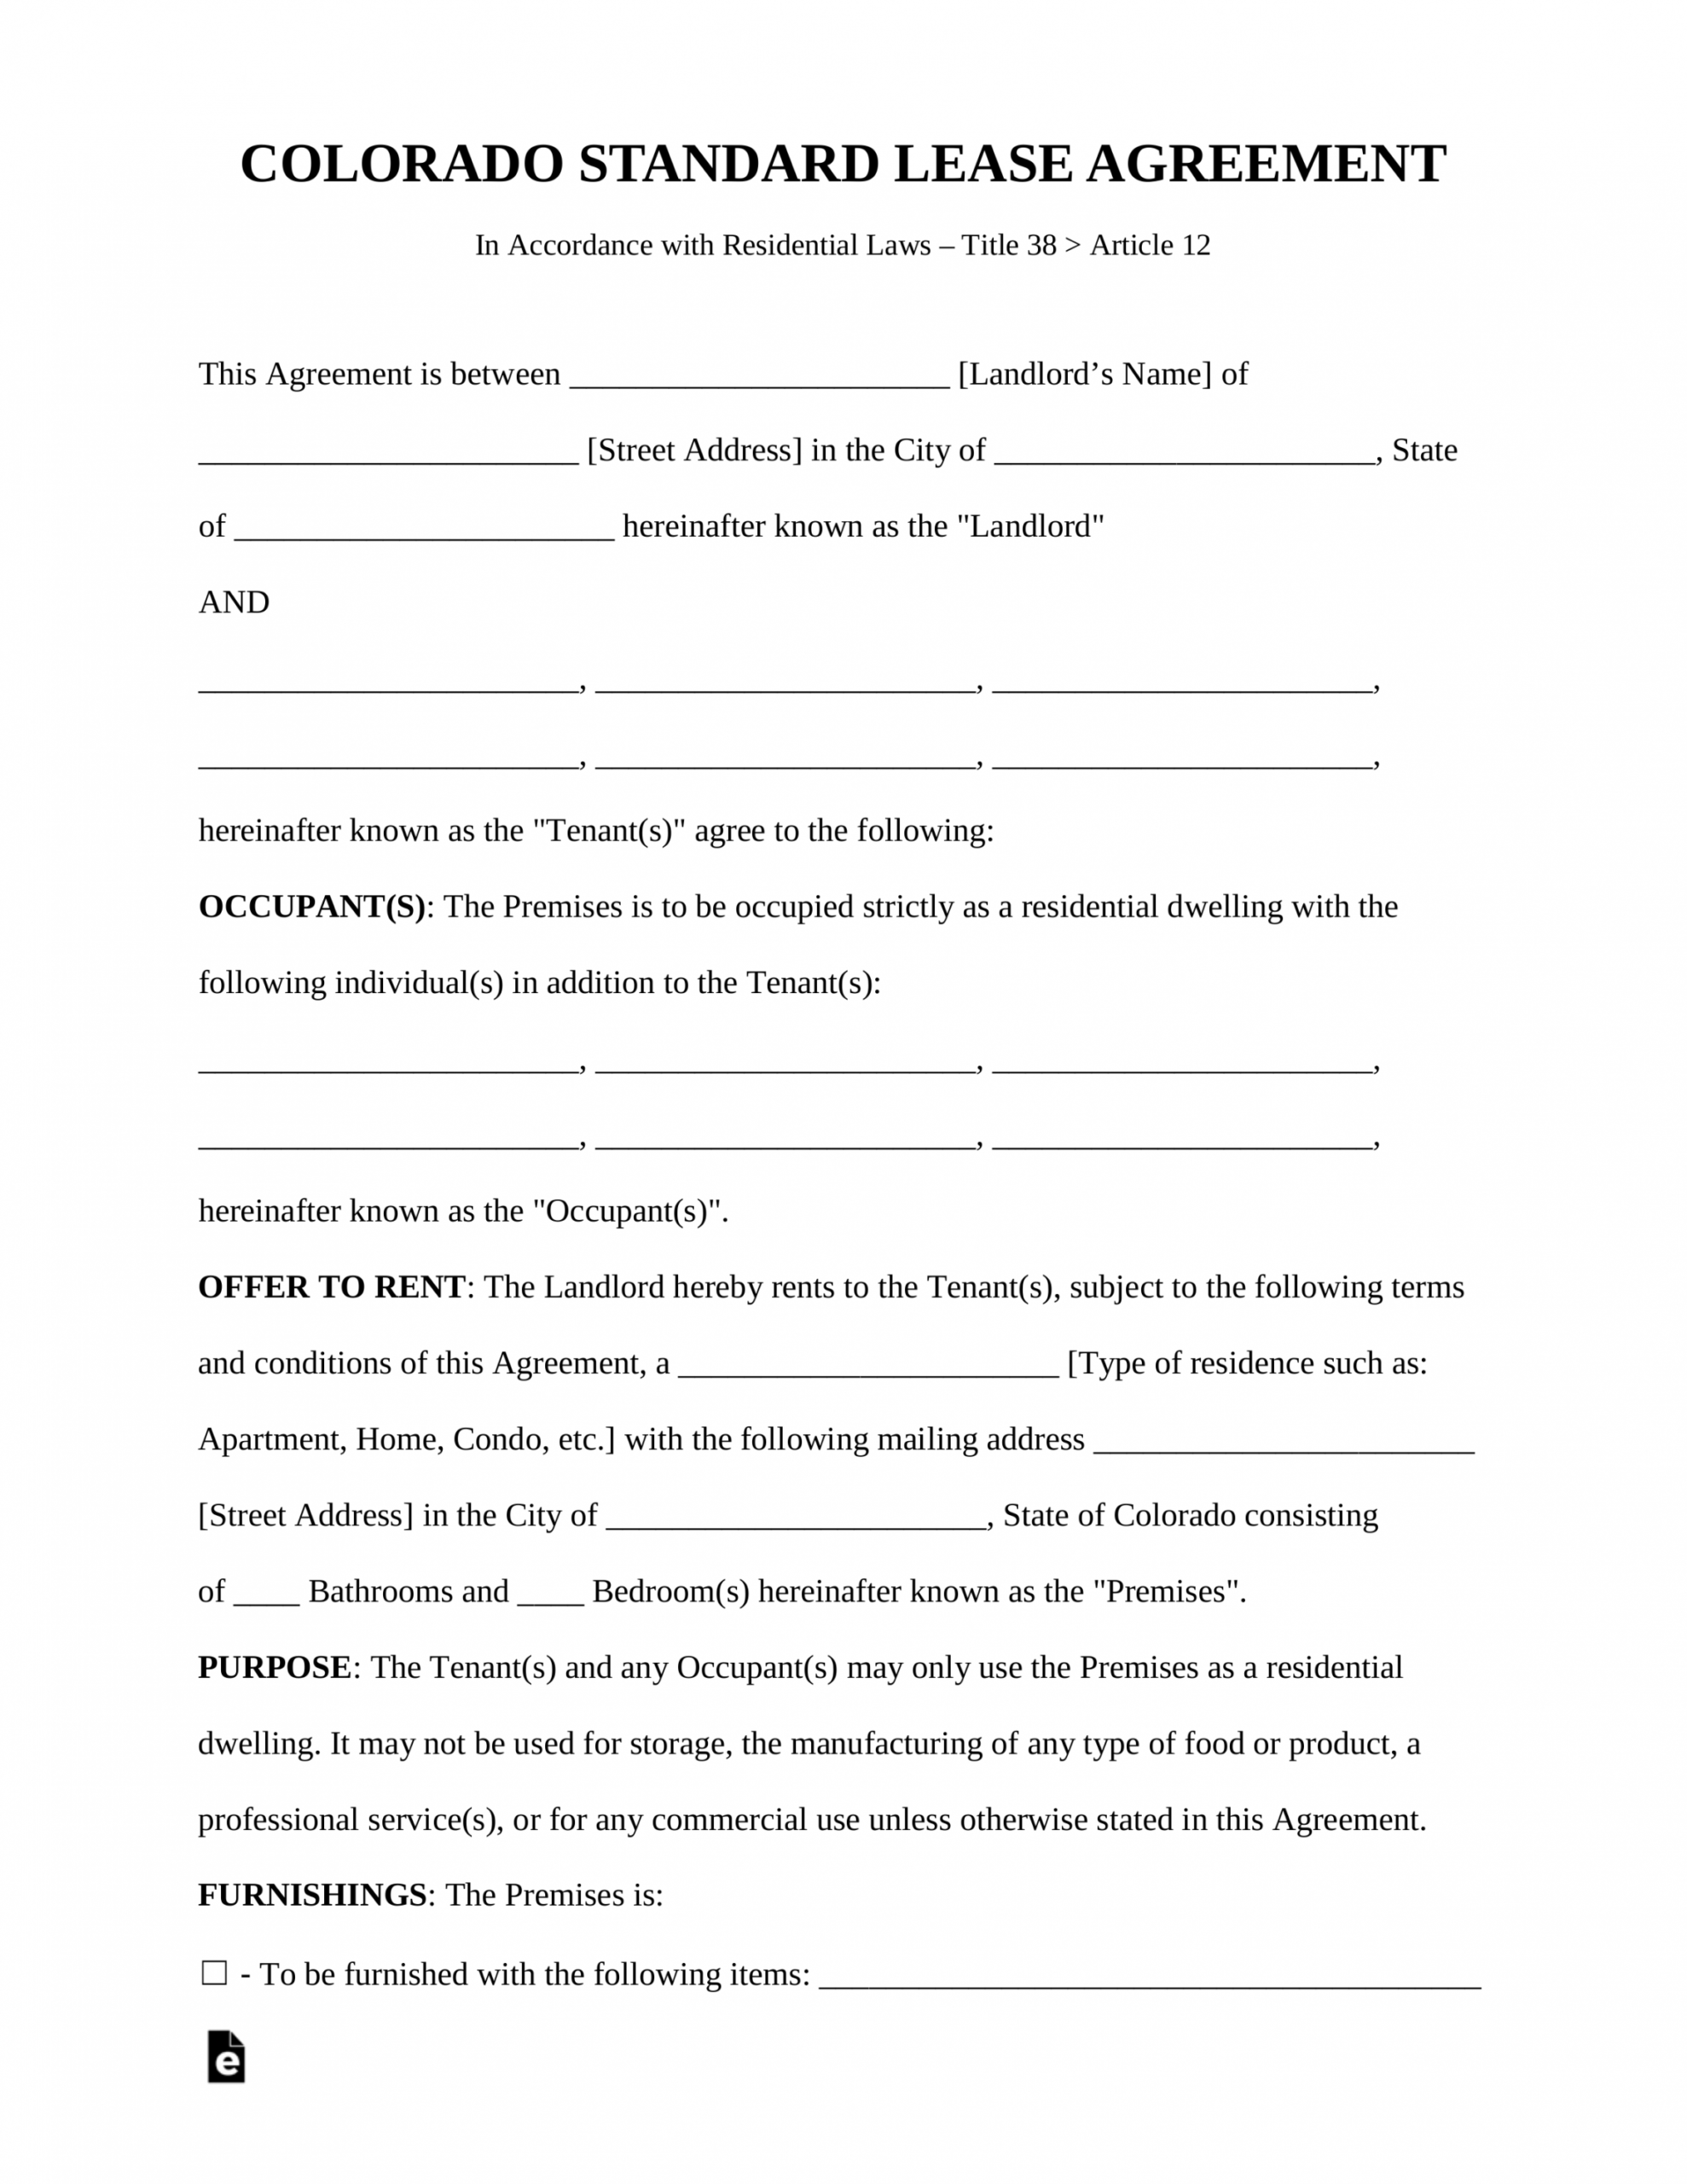 free colorado standard residential lease agreement template apt lease agreement template example